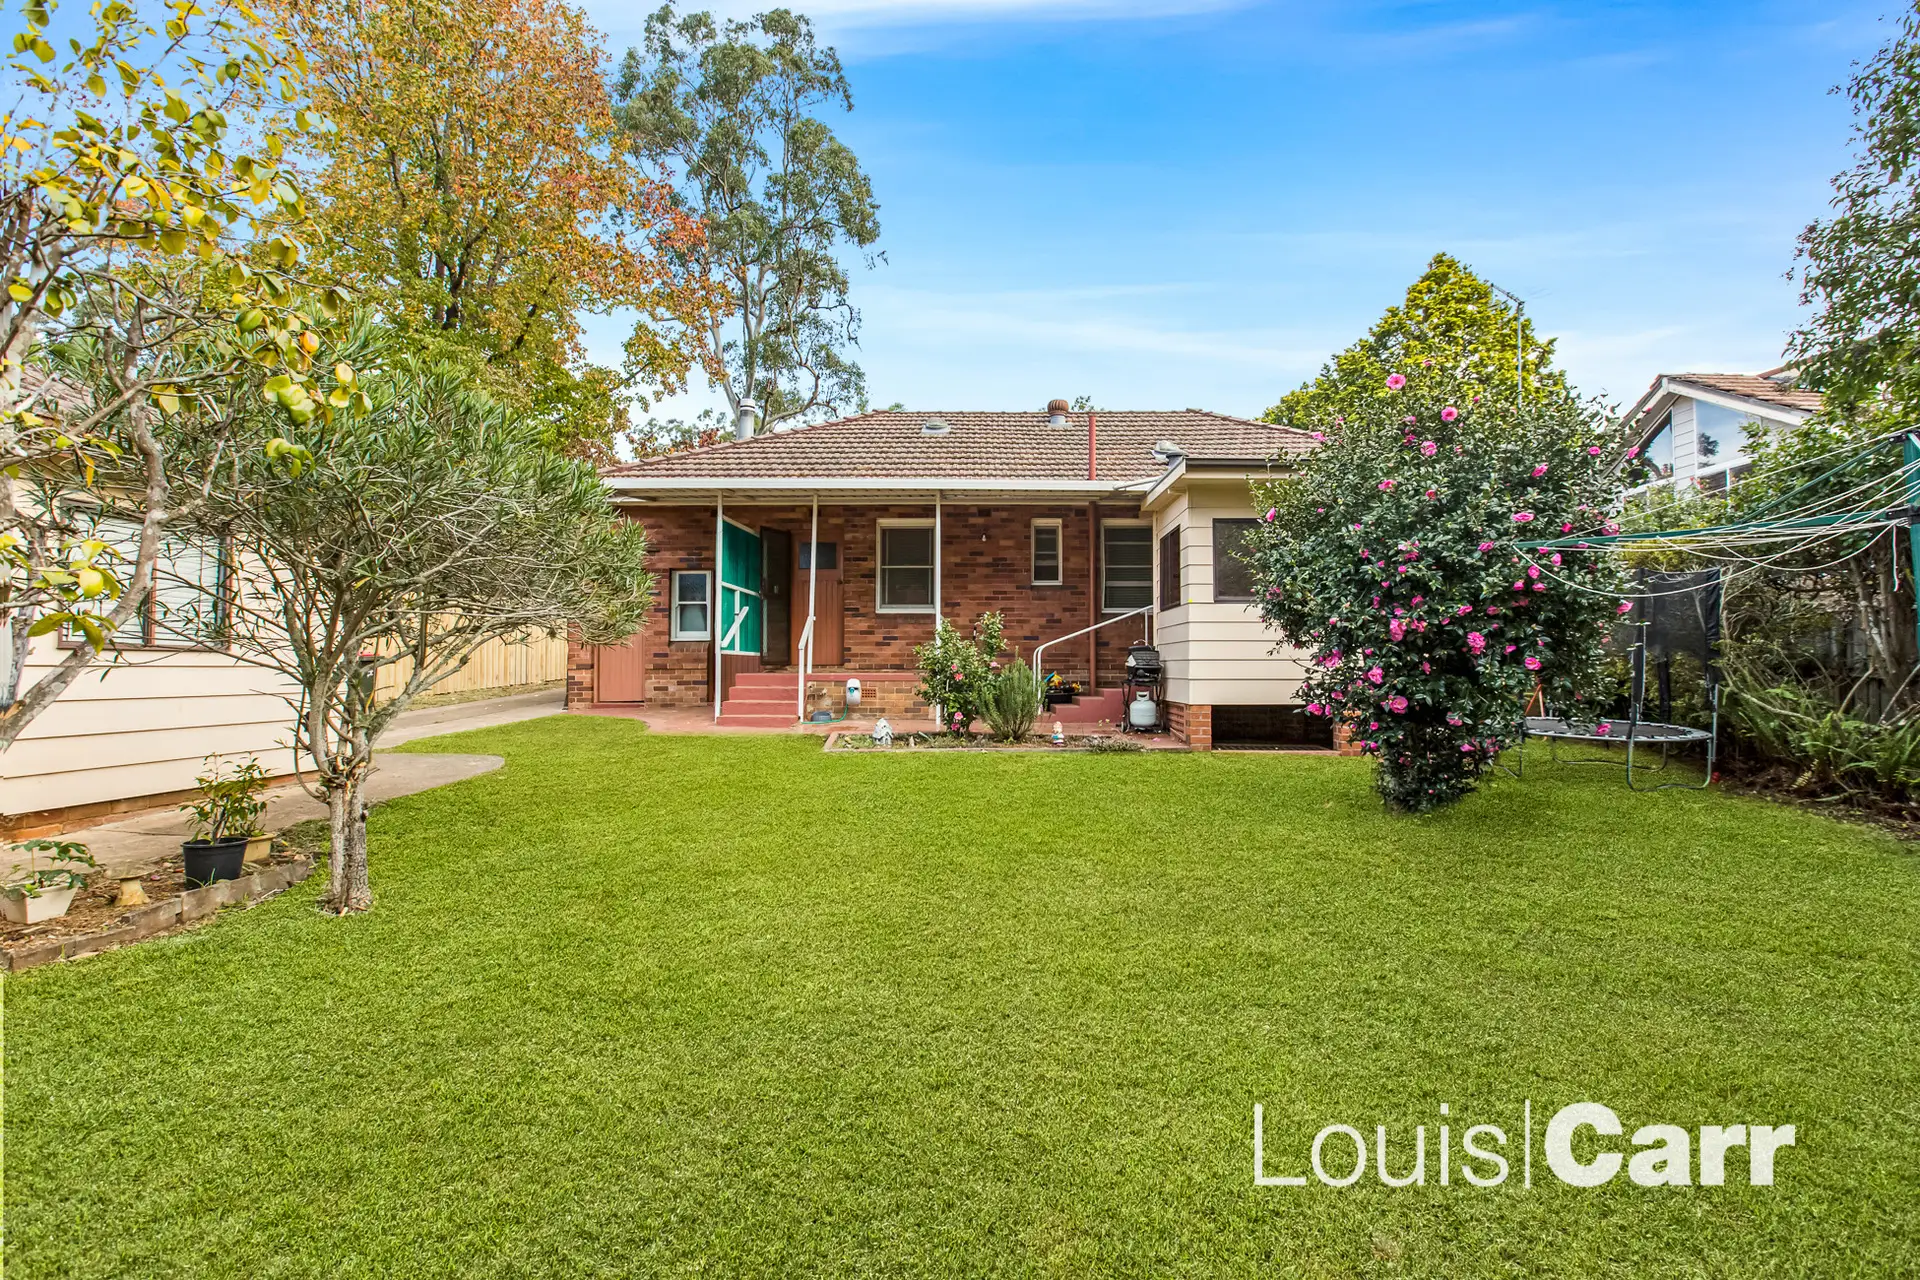 Photo #5: 92 Cardinal Avenue, West Pennant Hills - Sold by Louis Carr Real Estate